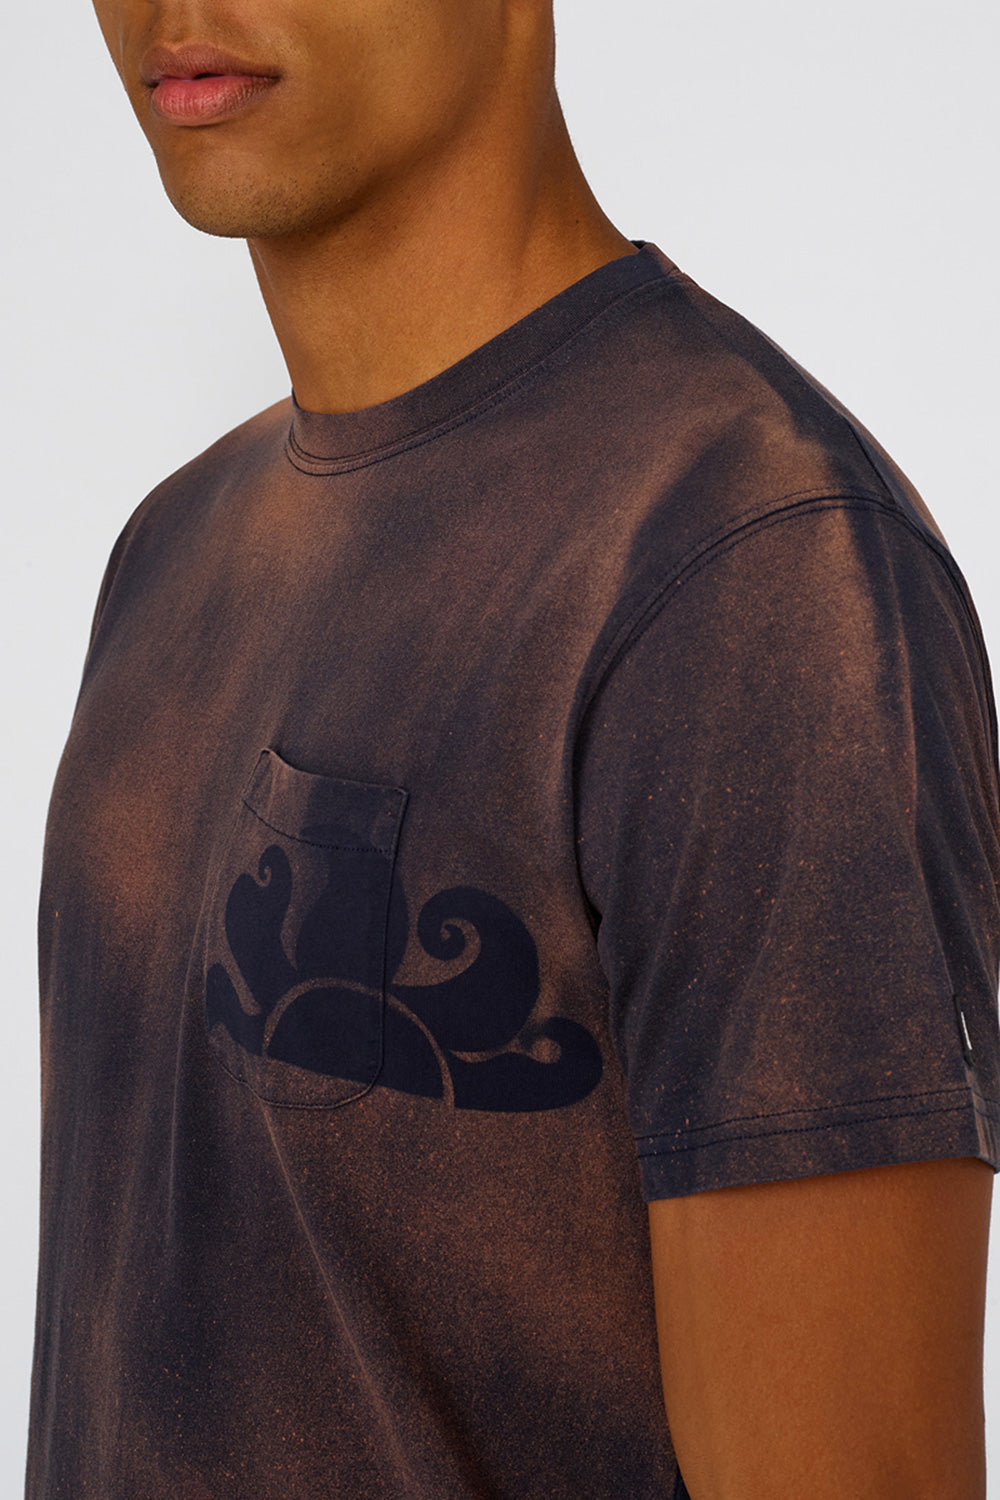 T-SHIRT CON LOGO STAMPATO A MANO - GOLDENWAVE SPECIAL EDITION